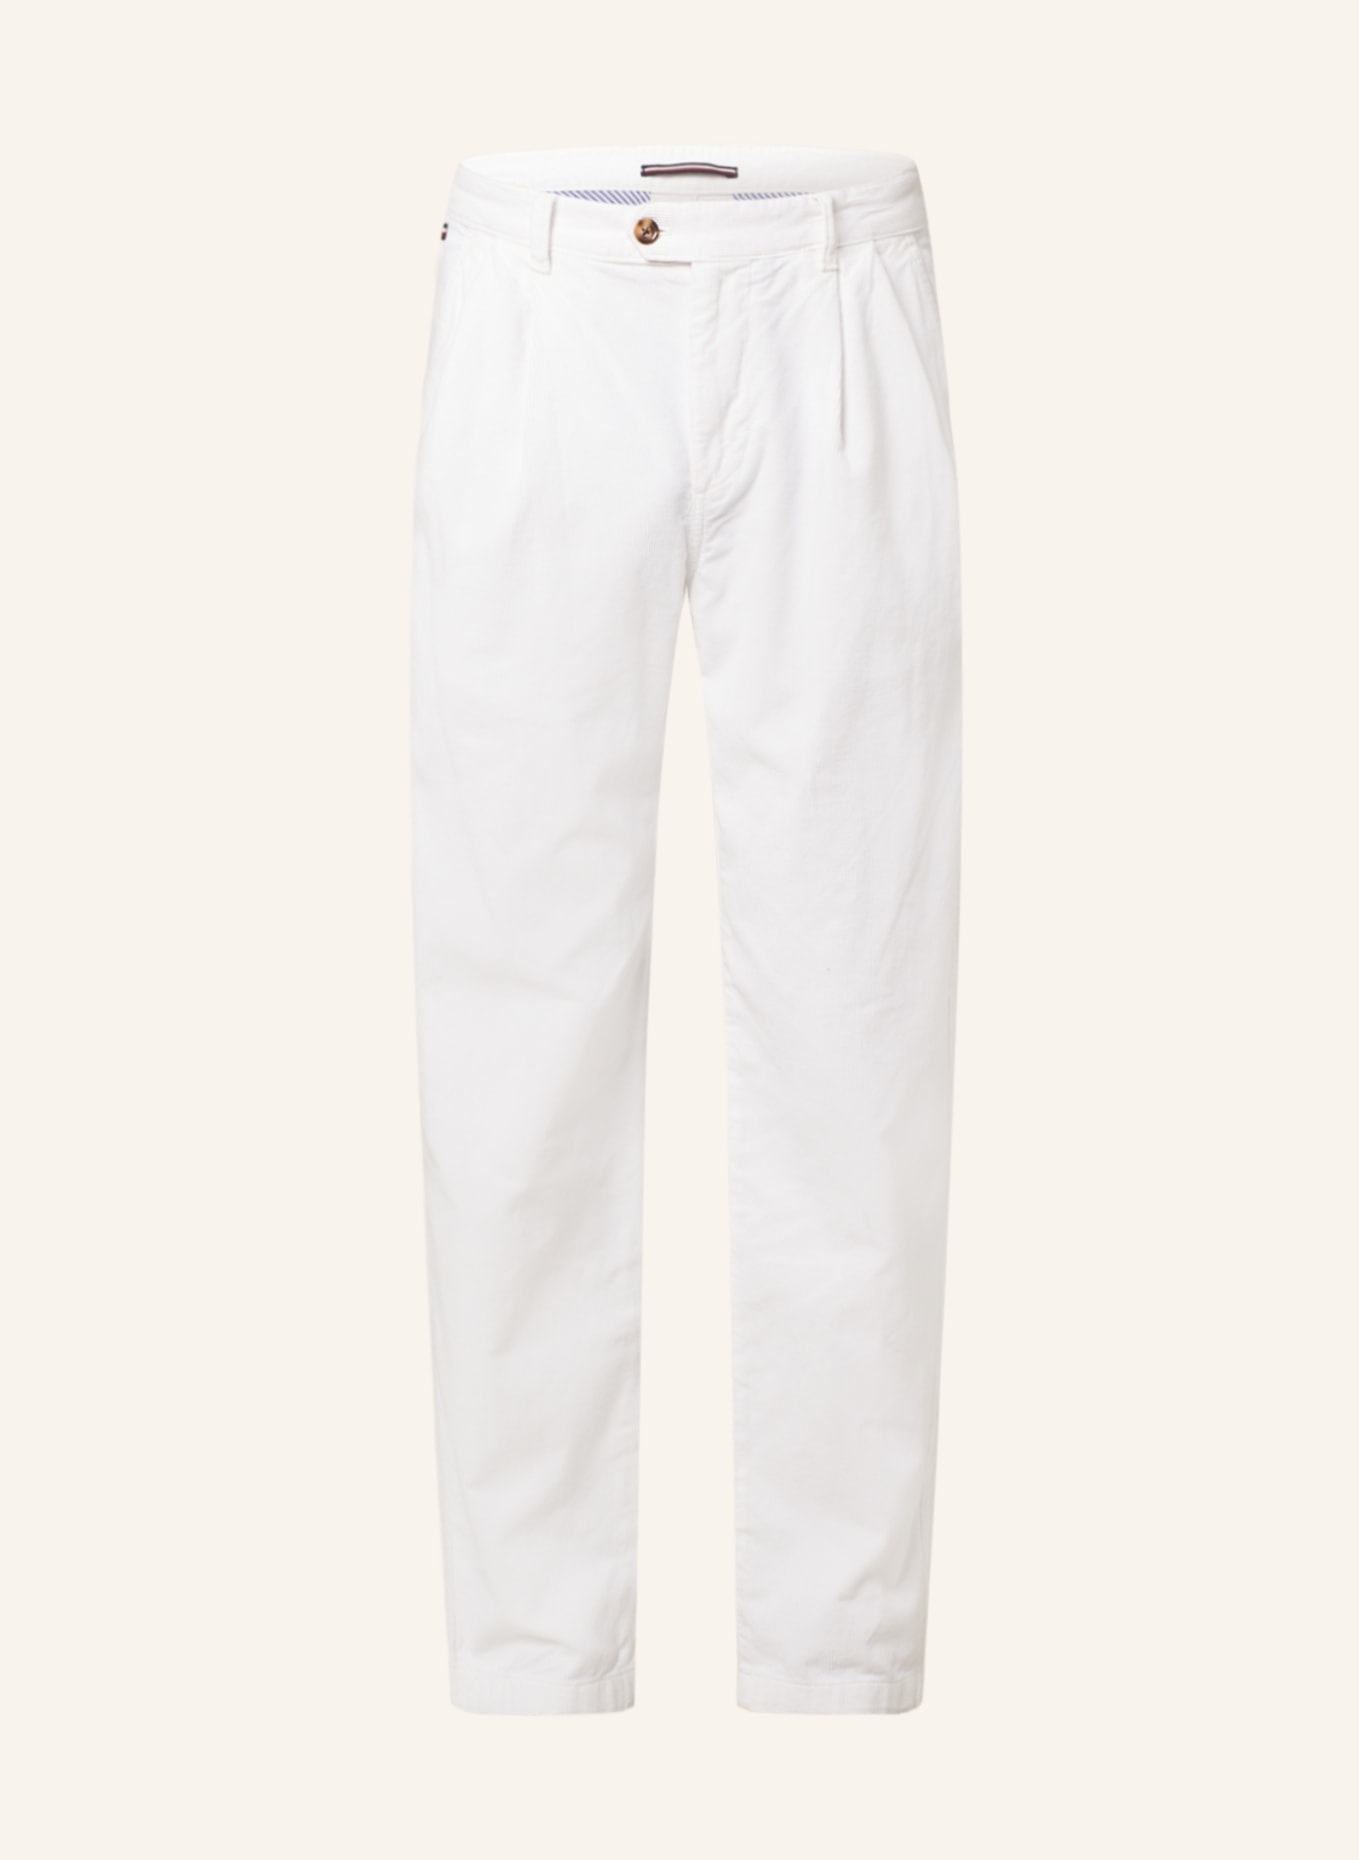 TOMMY HILFIGER Cordhose DENTON Wide Tapered Fit, Farbe: WEISS (Bild 1)